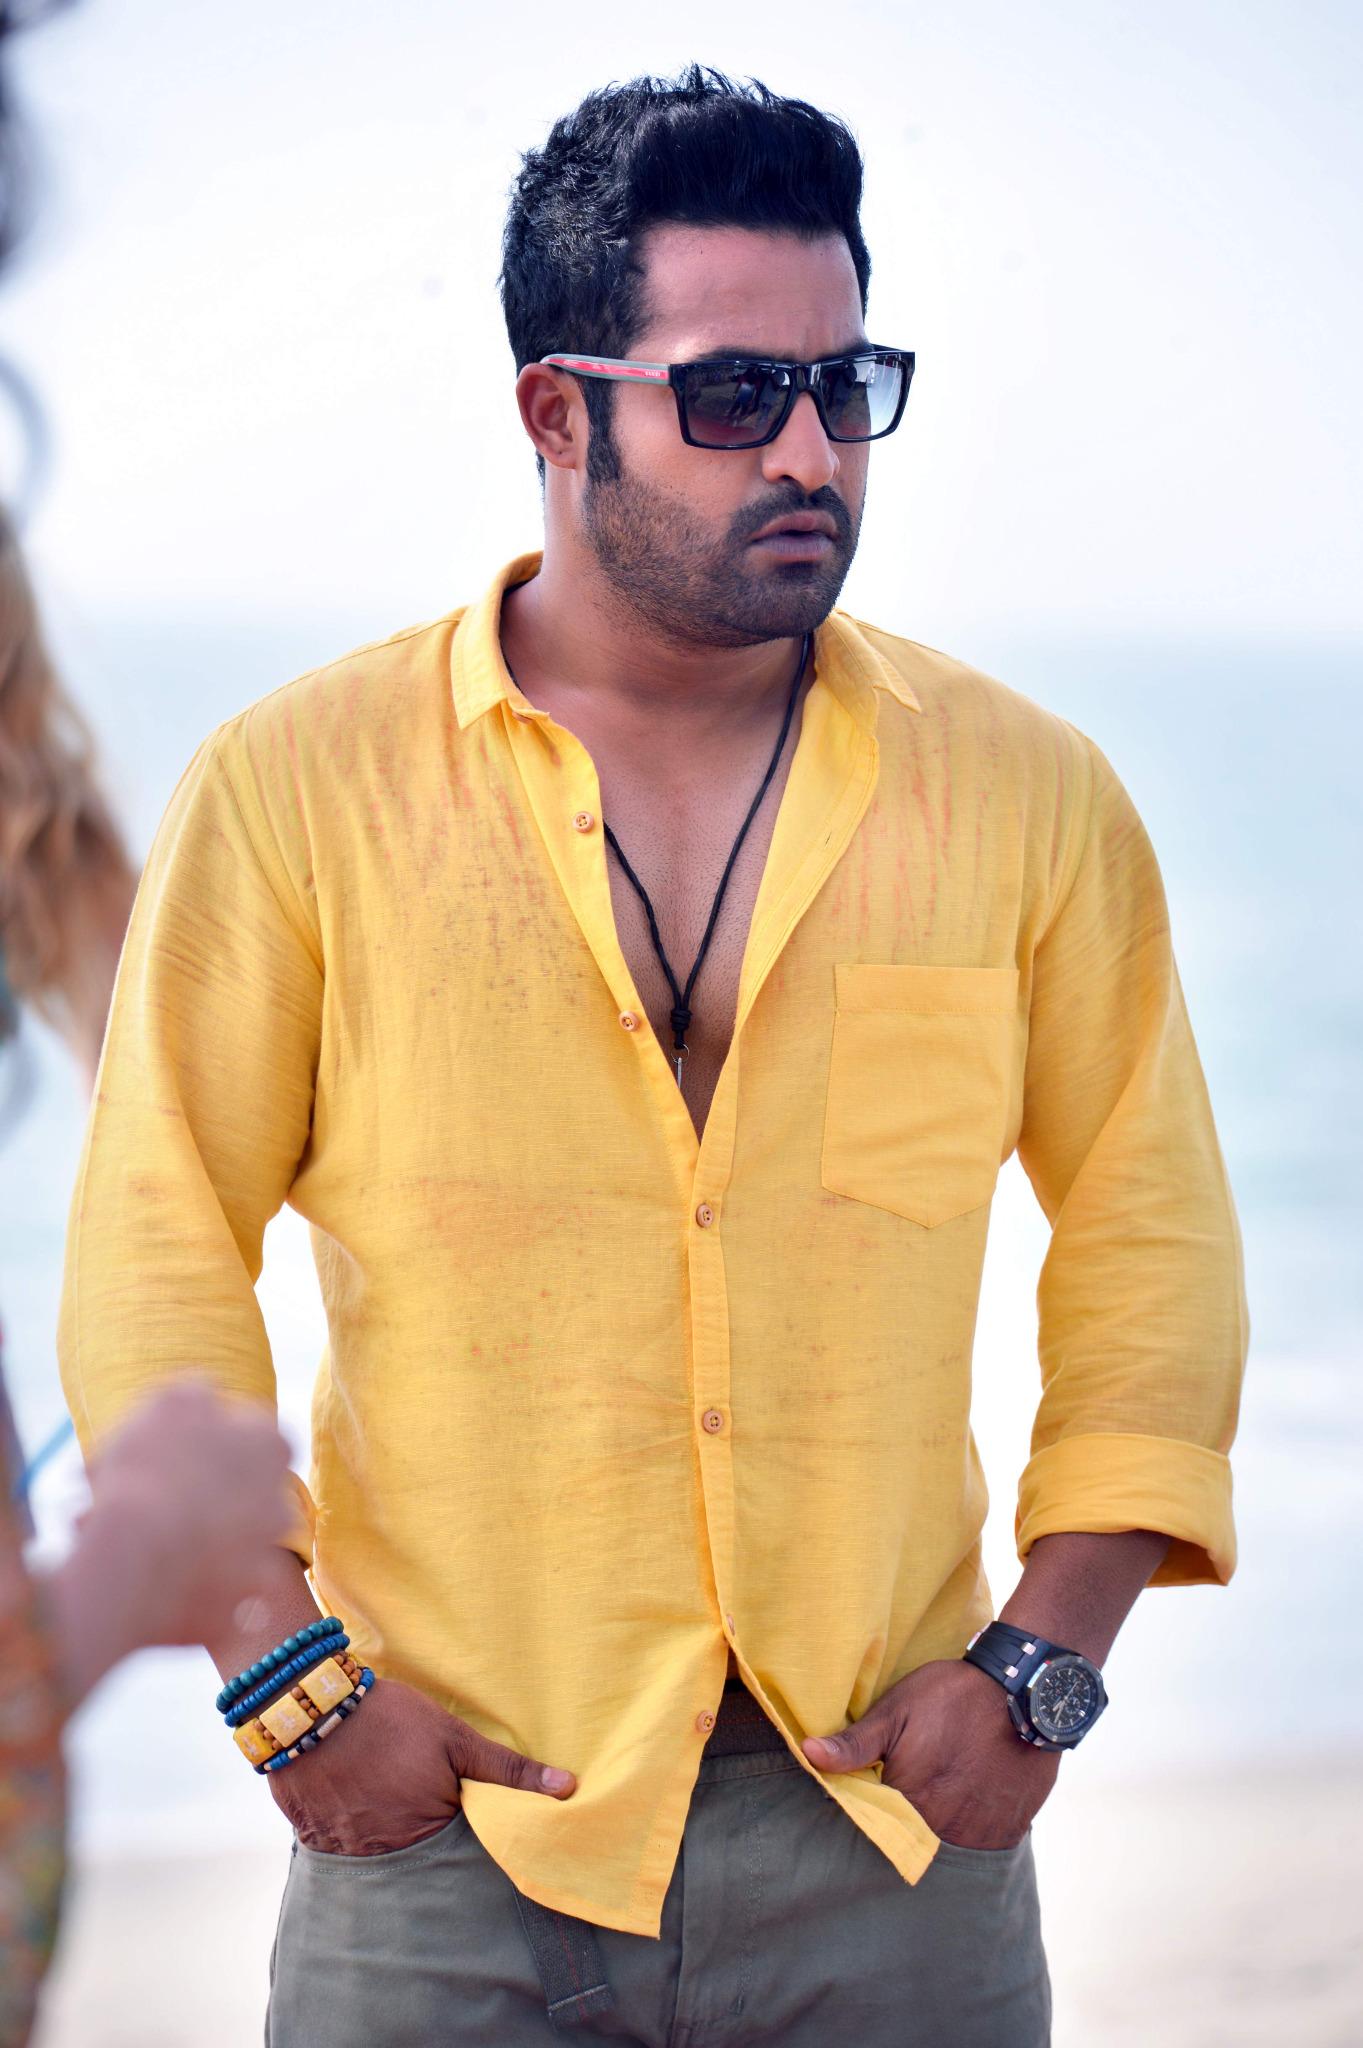 Who is the better actor among Jr. NTR and Vikram? - Keep similing - Quora